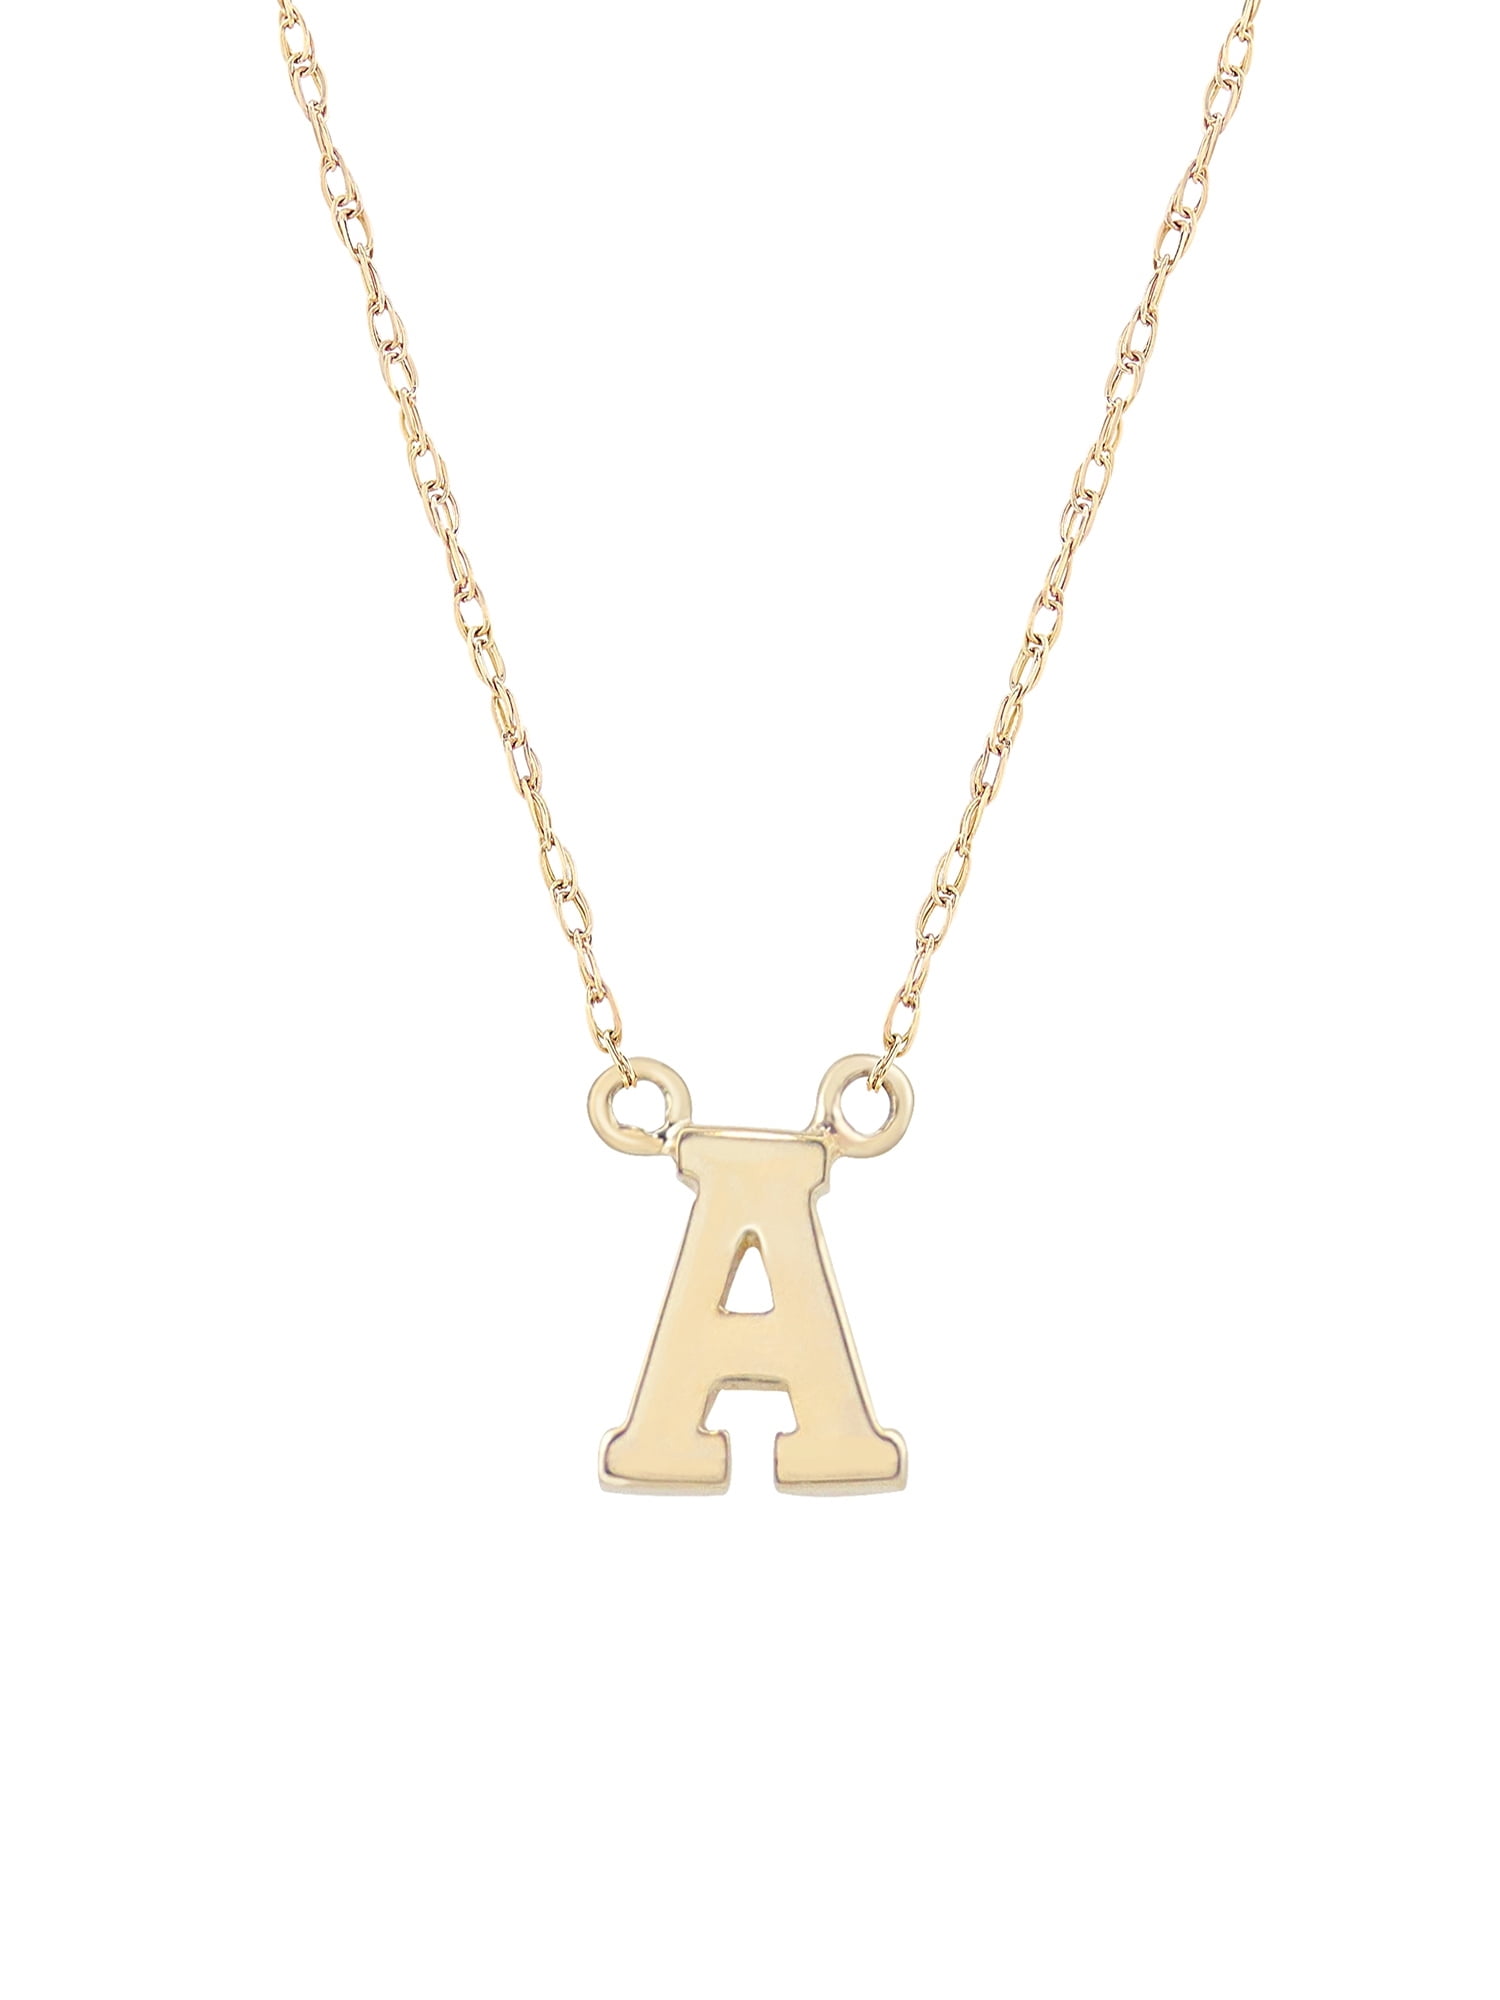 Unbrand - 14K Yellow Gold Classic Alphabet Initial Pendant Necklace, A